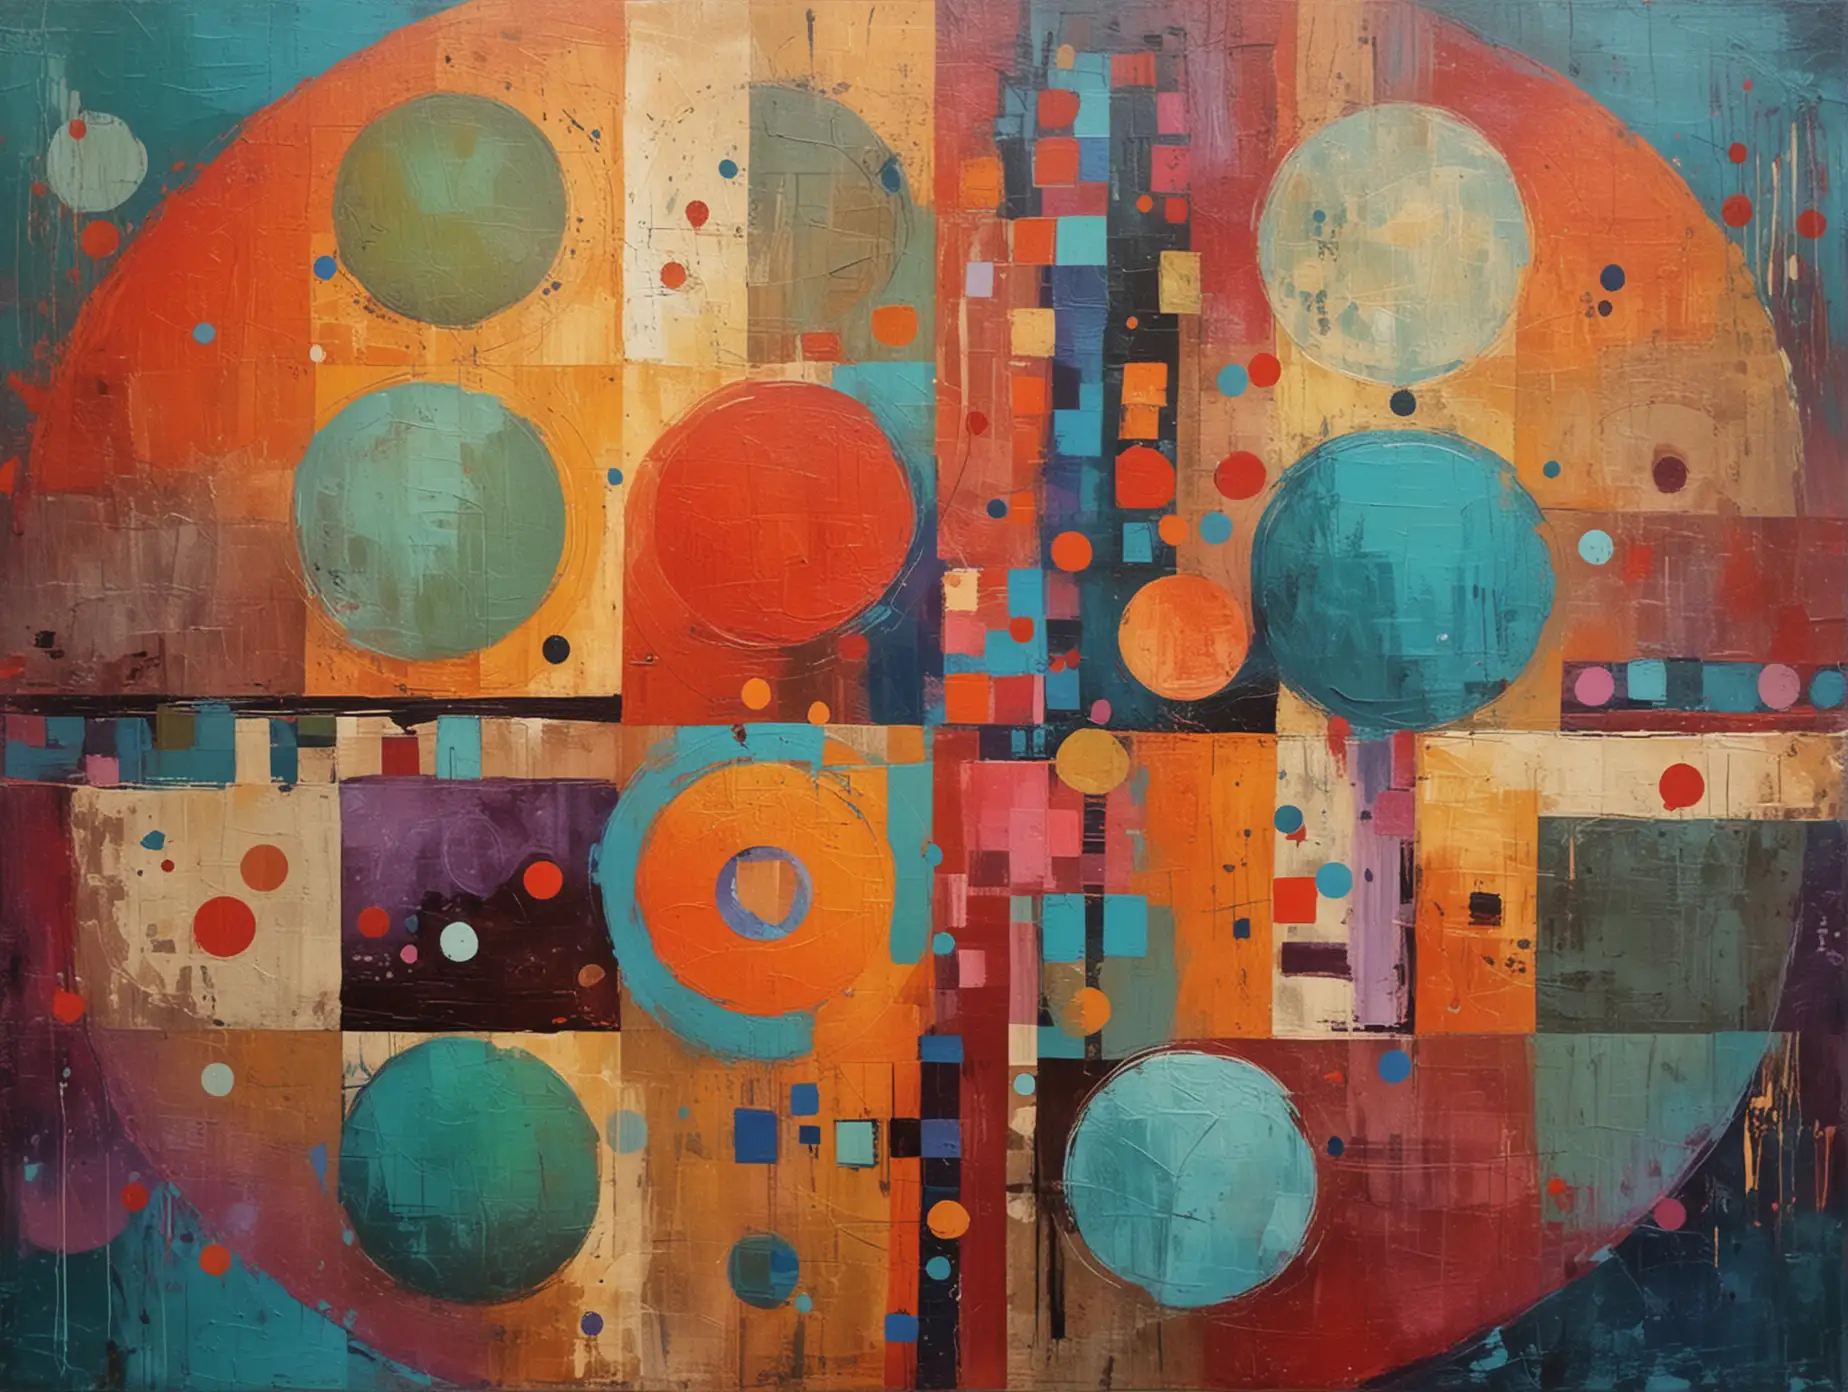 Vibrant Abstract Geometric Art with Circles and Squares